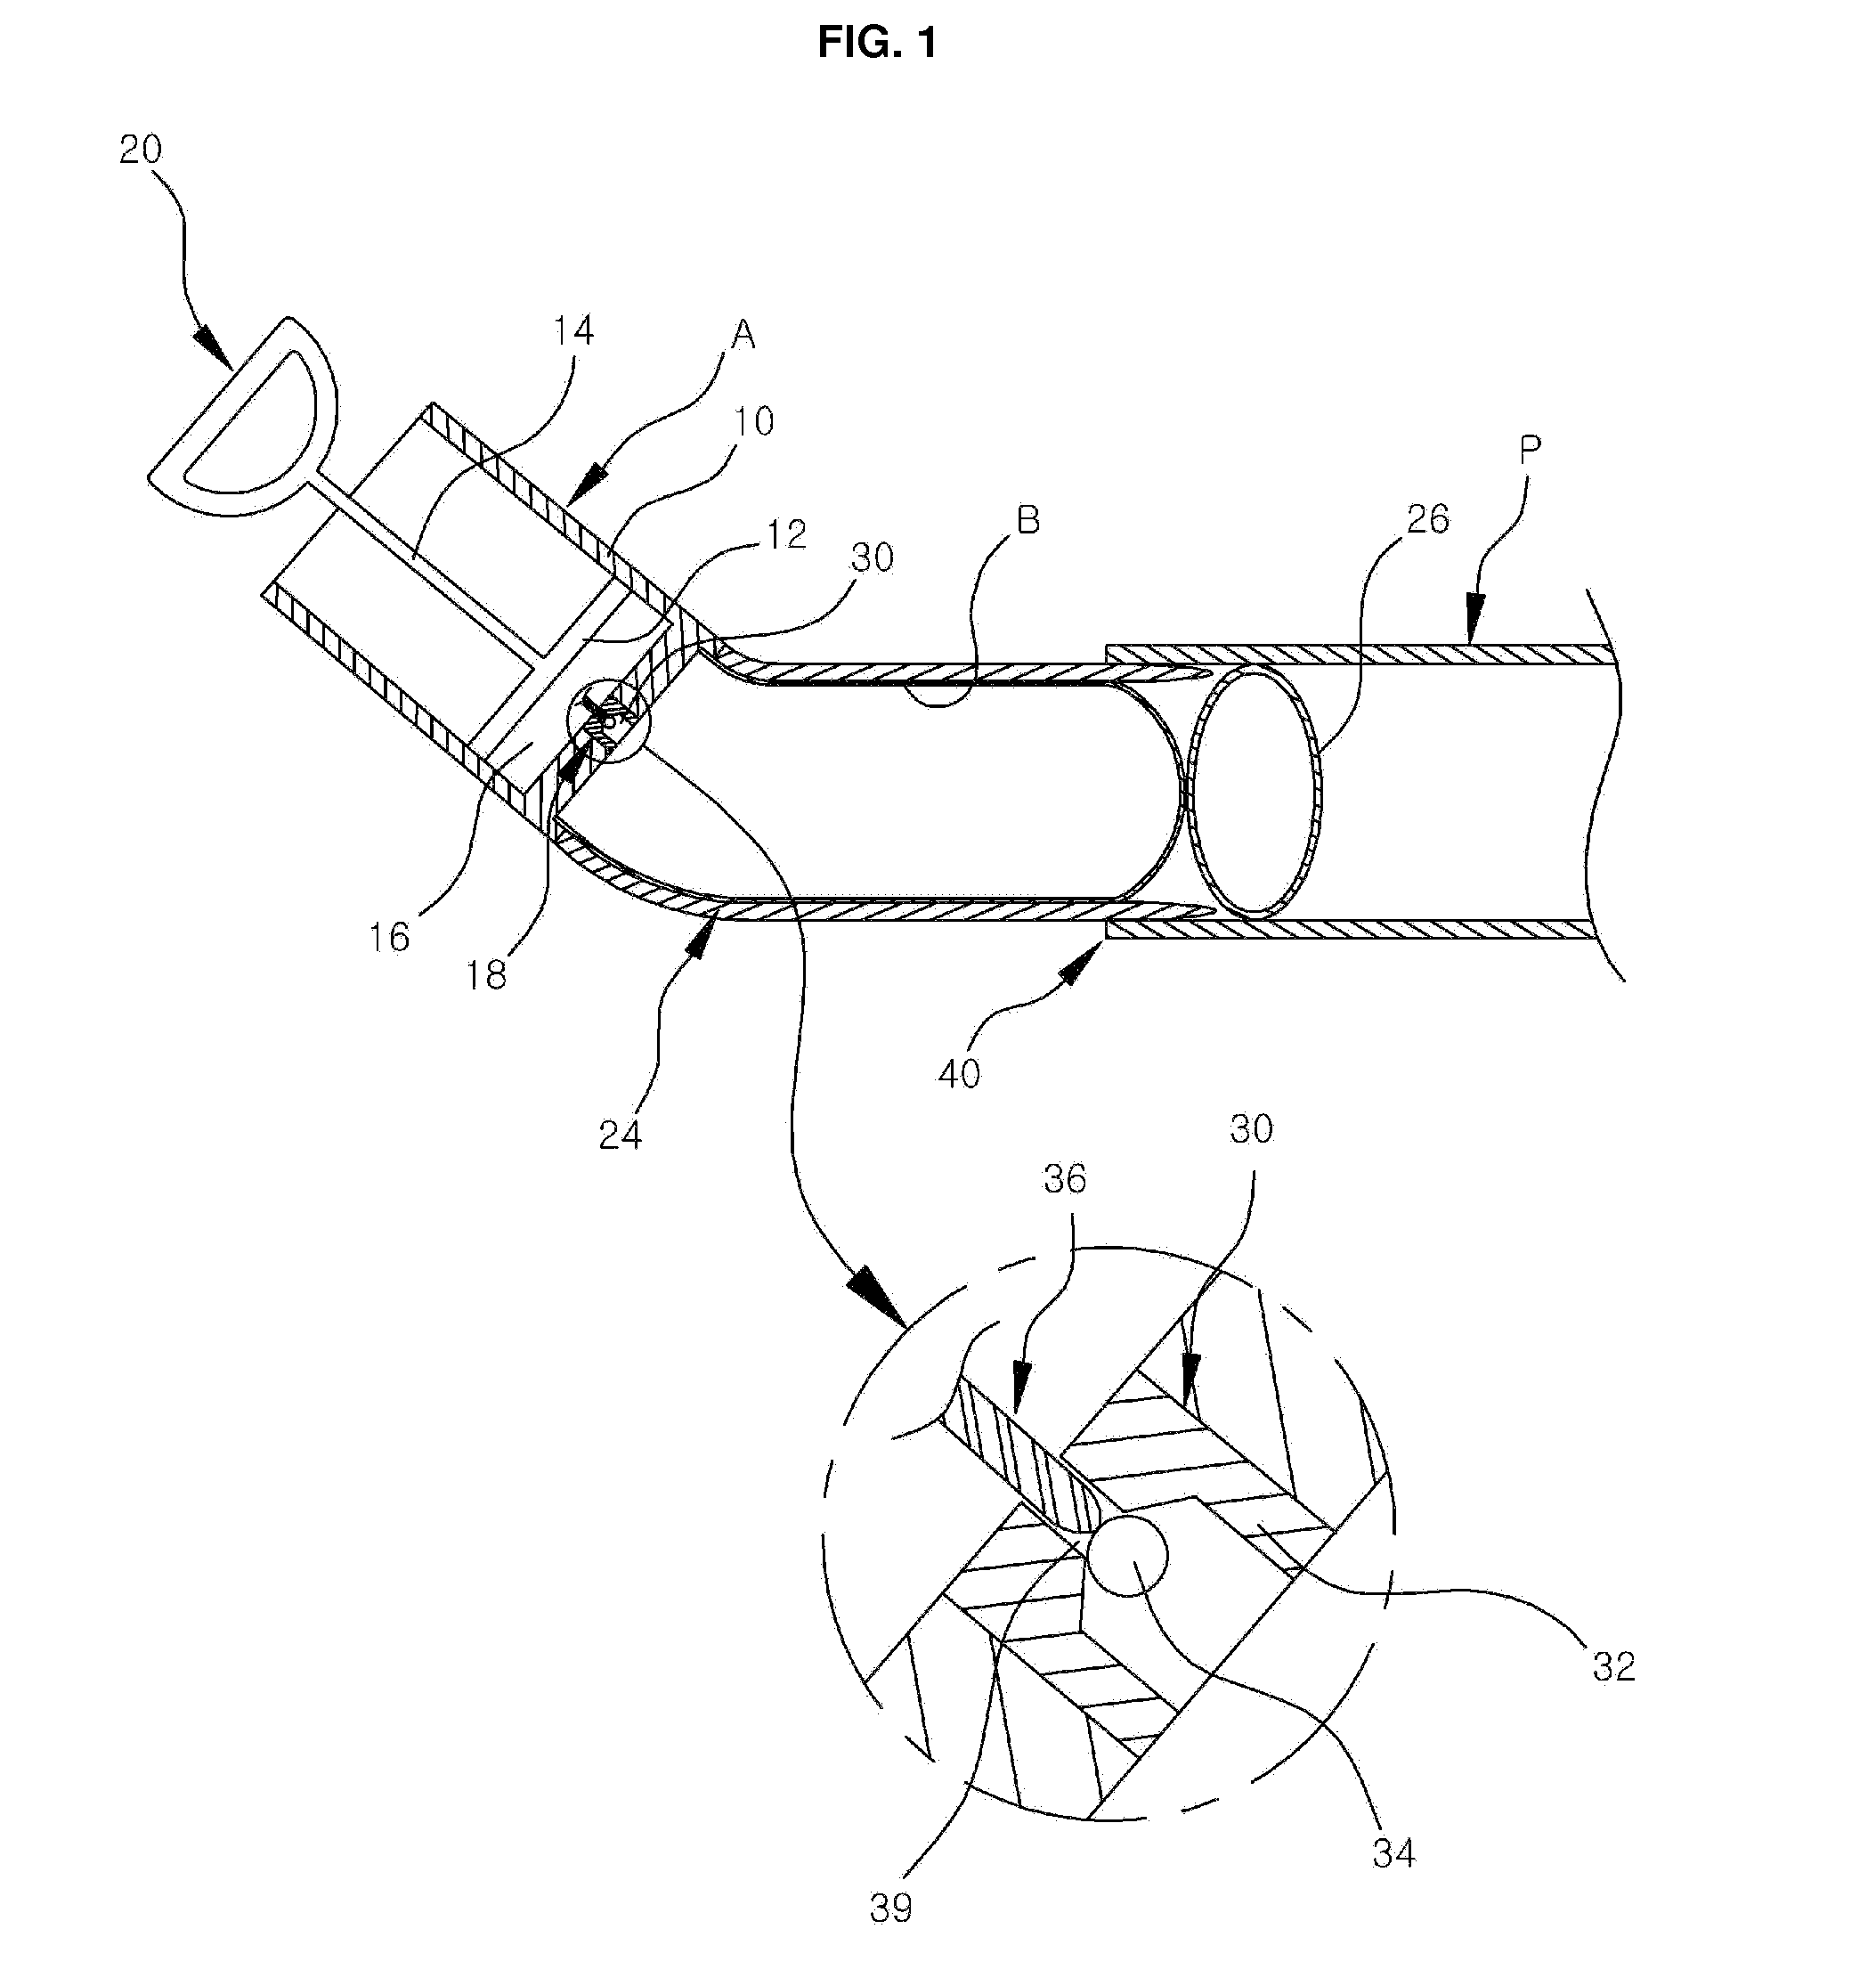 Device for clearing pipe blockage